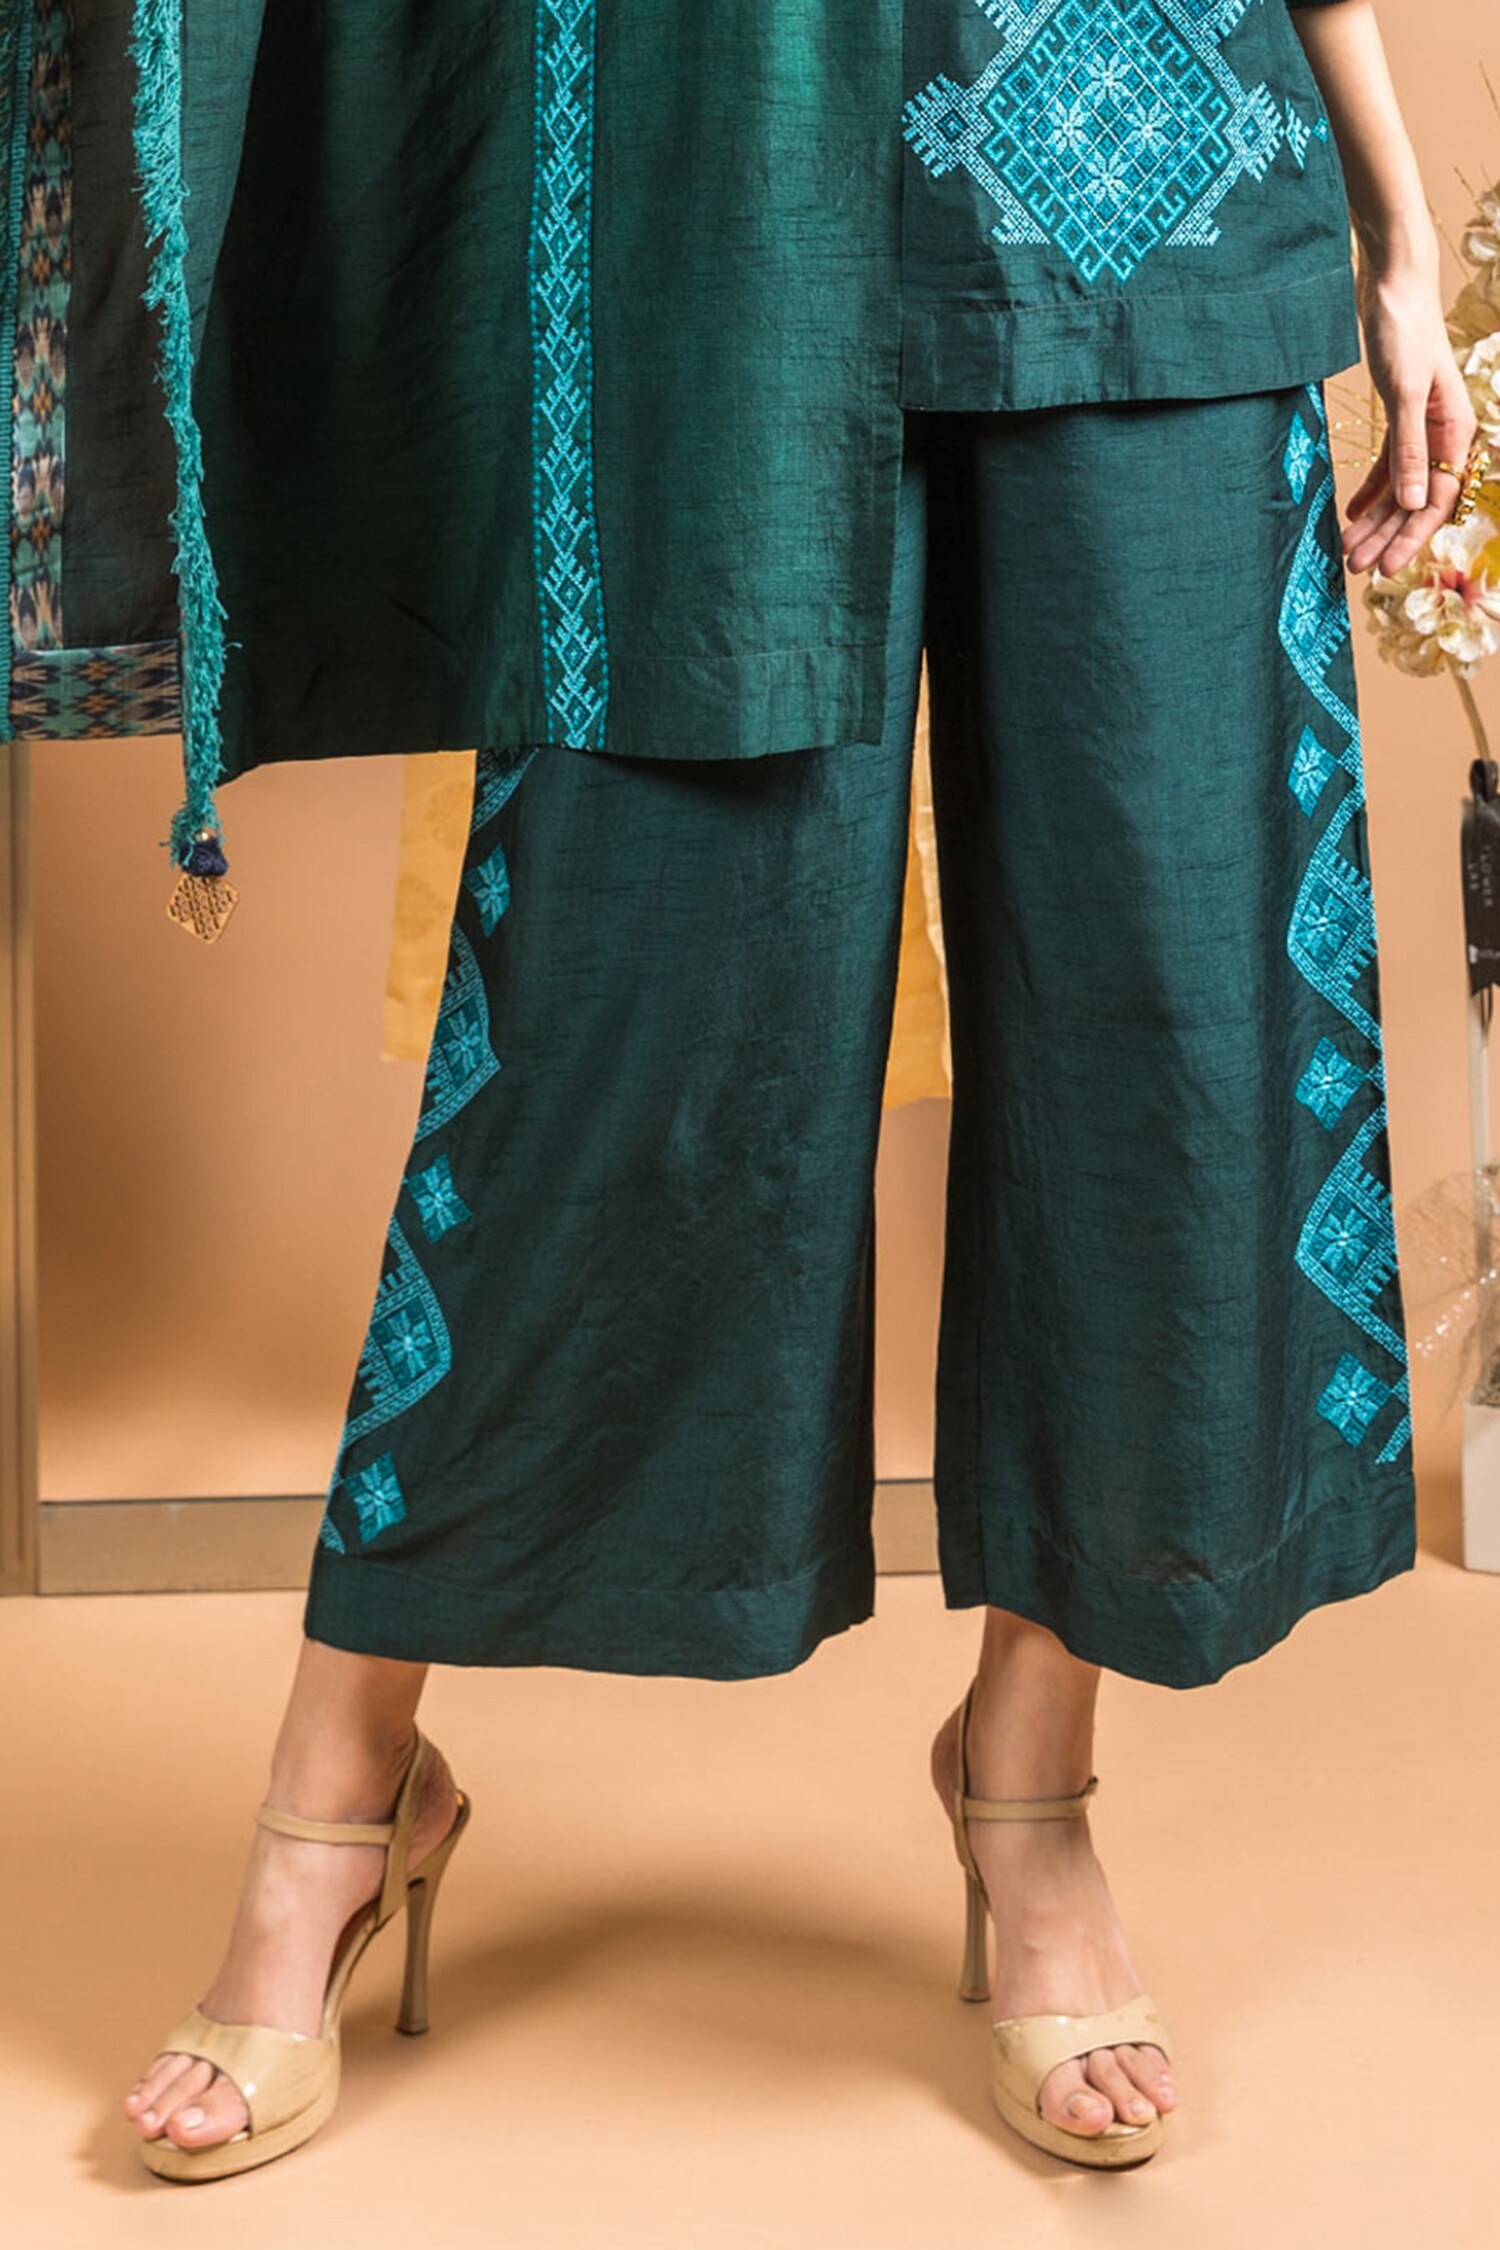 NISHAT LINEN UAE  Printed Embroidered Formal Ladies Trousers Stitched  Summer latest Collection 2023  Nishat Linen UAE